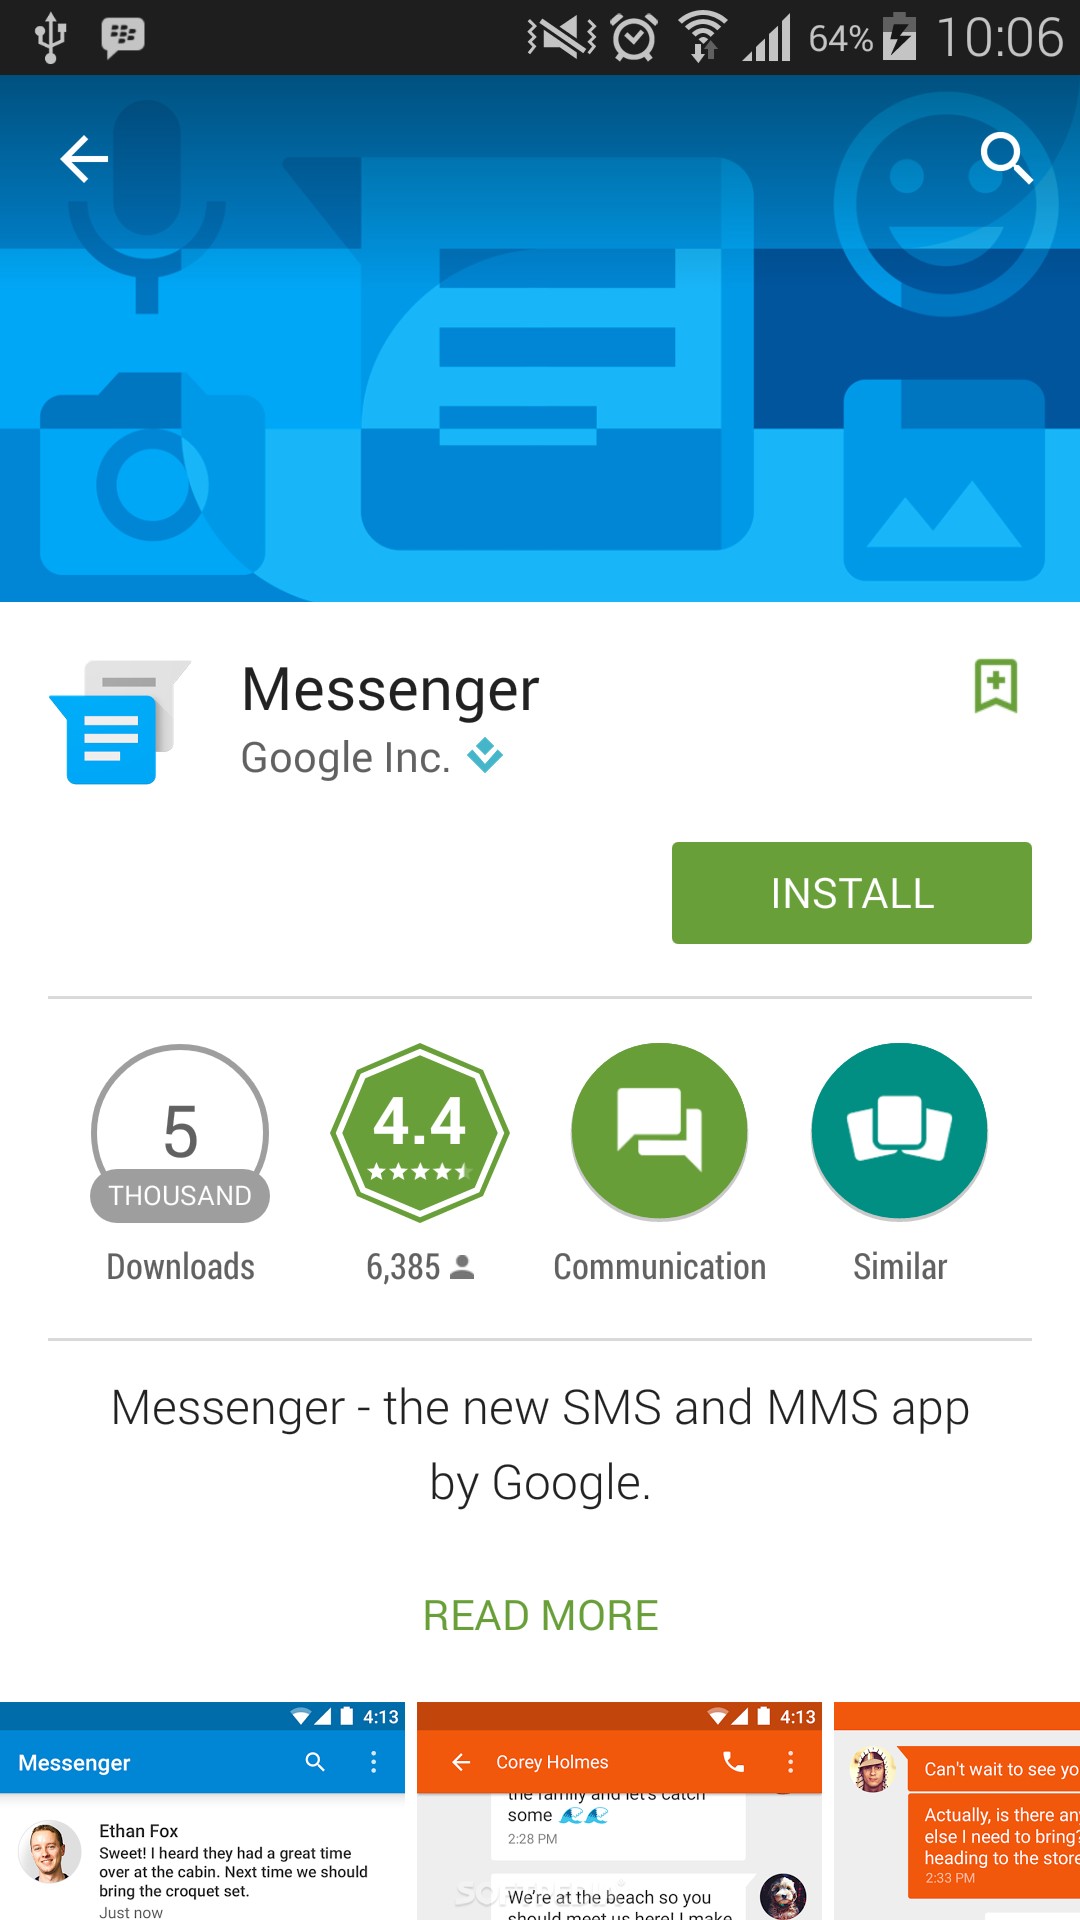 Google Releases “Messenger” App for Android That May Replace Hangouts